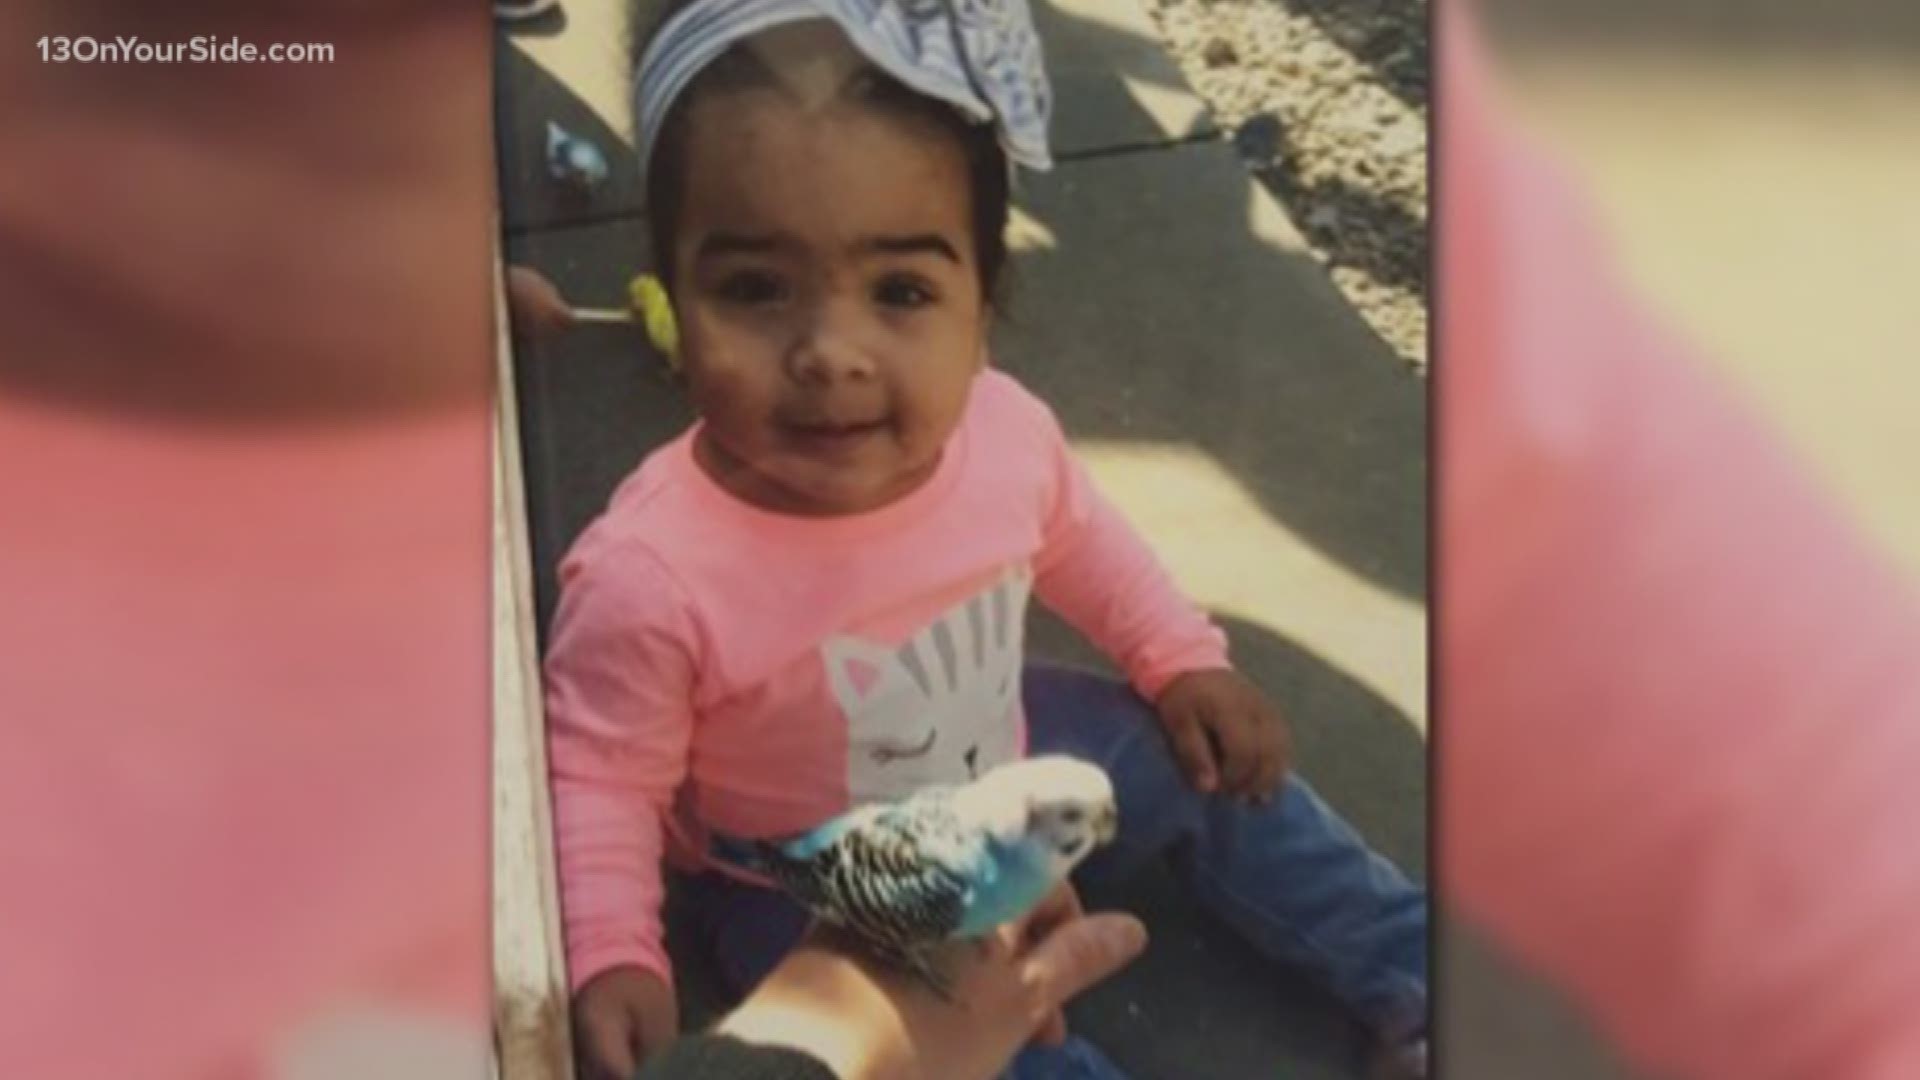 Two-year-old Muskegon girl found safe